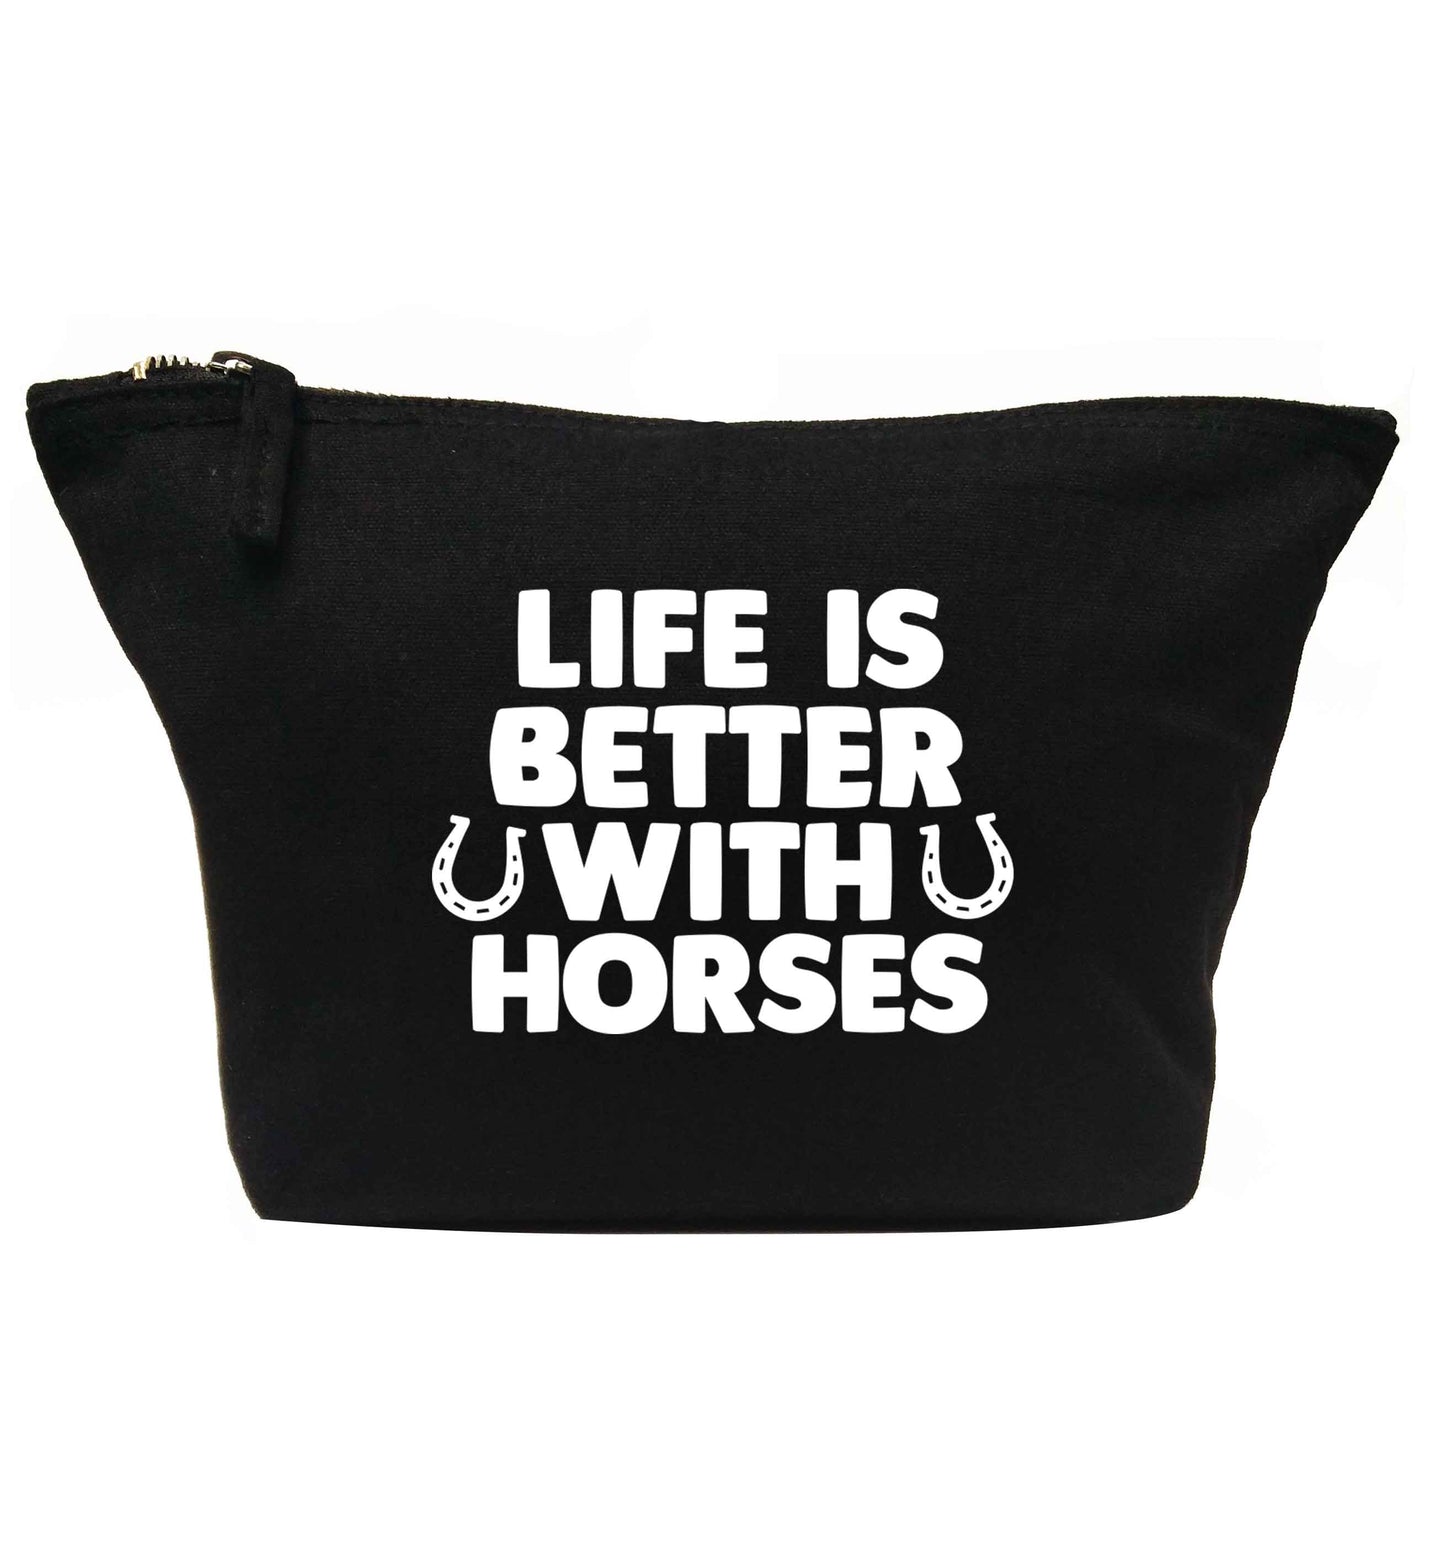 Life is better with horses | Makeup / wash bag